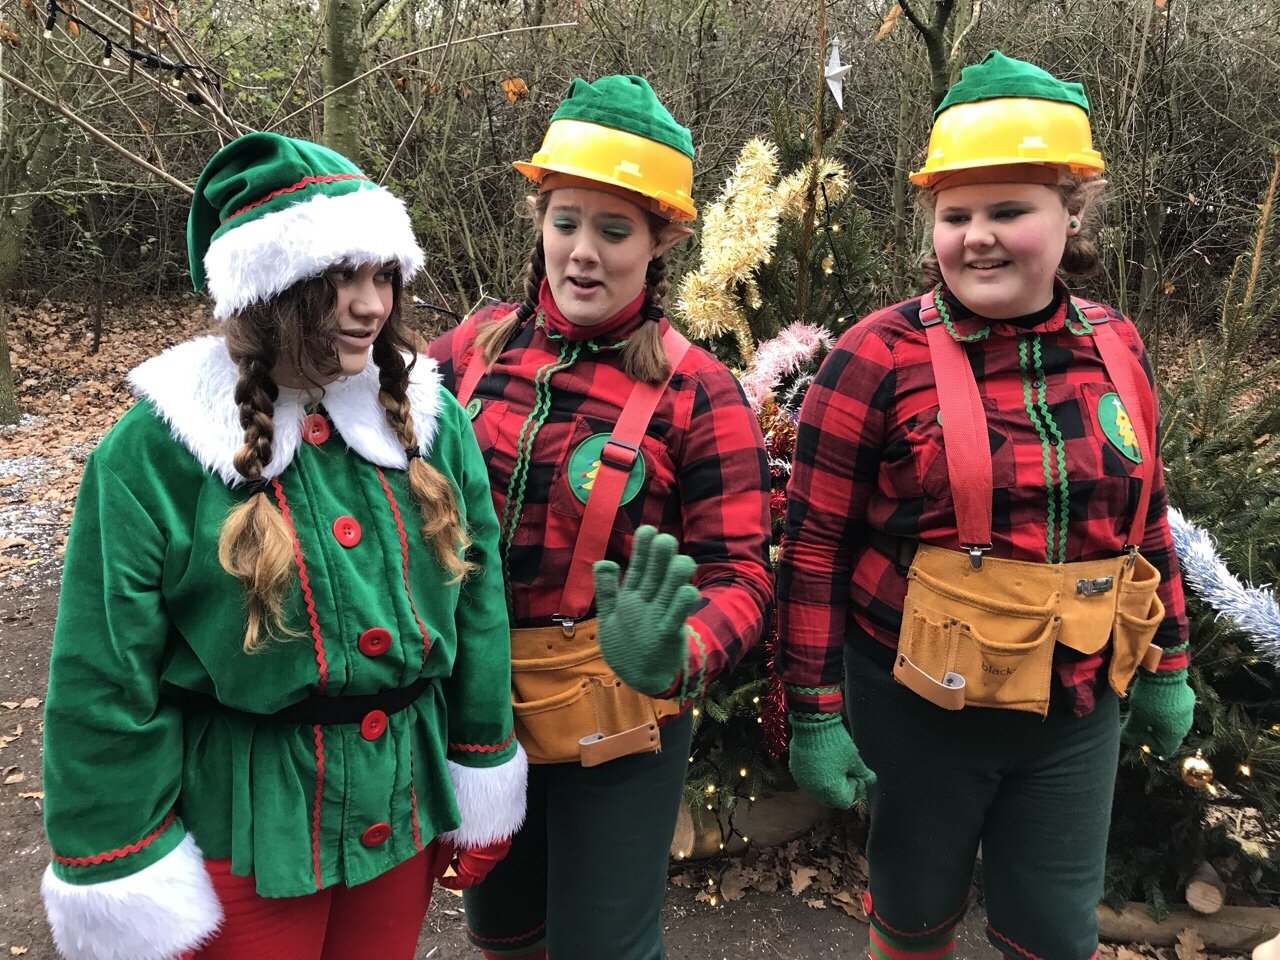 The lumberjack elves and Brumble elf An Elf's Wish at Nevendon Manor